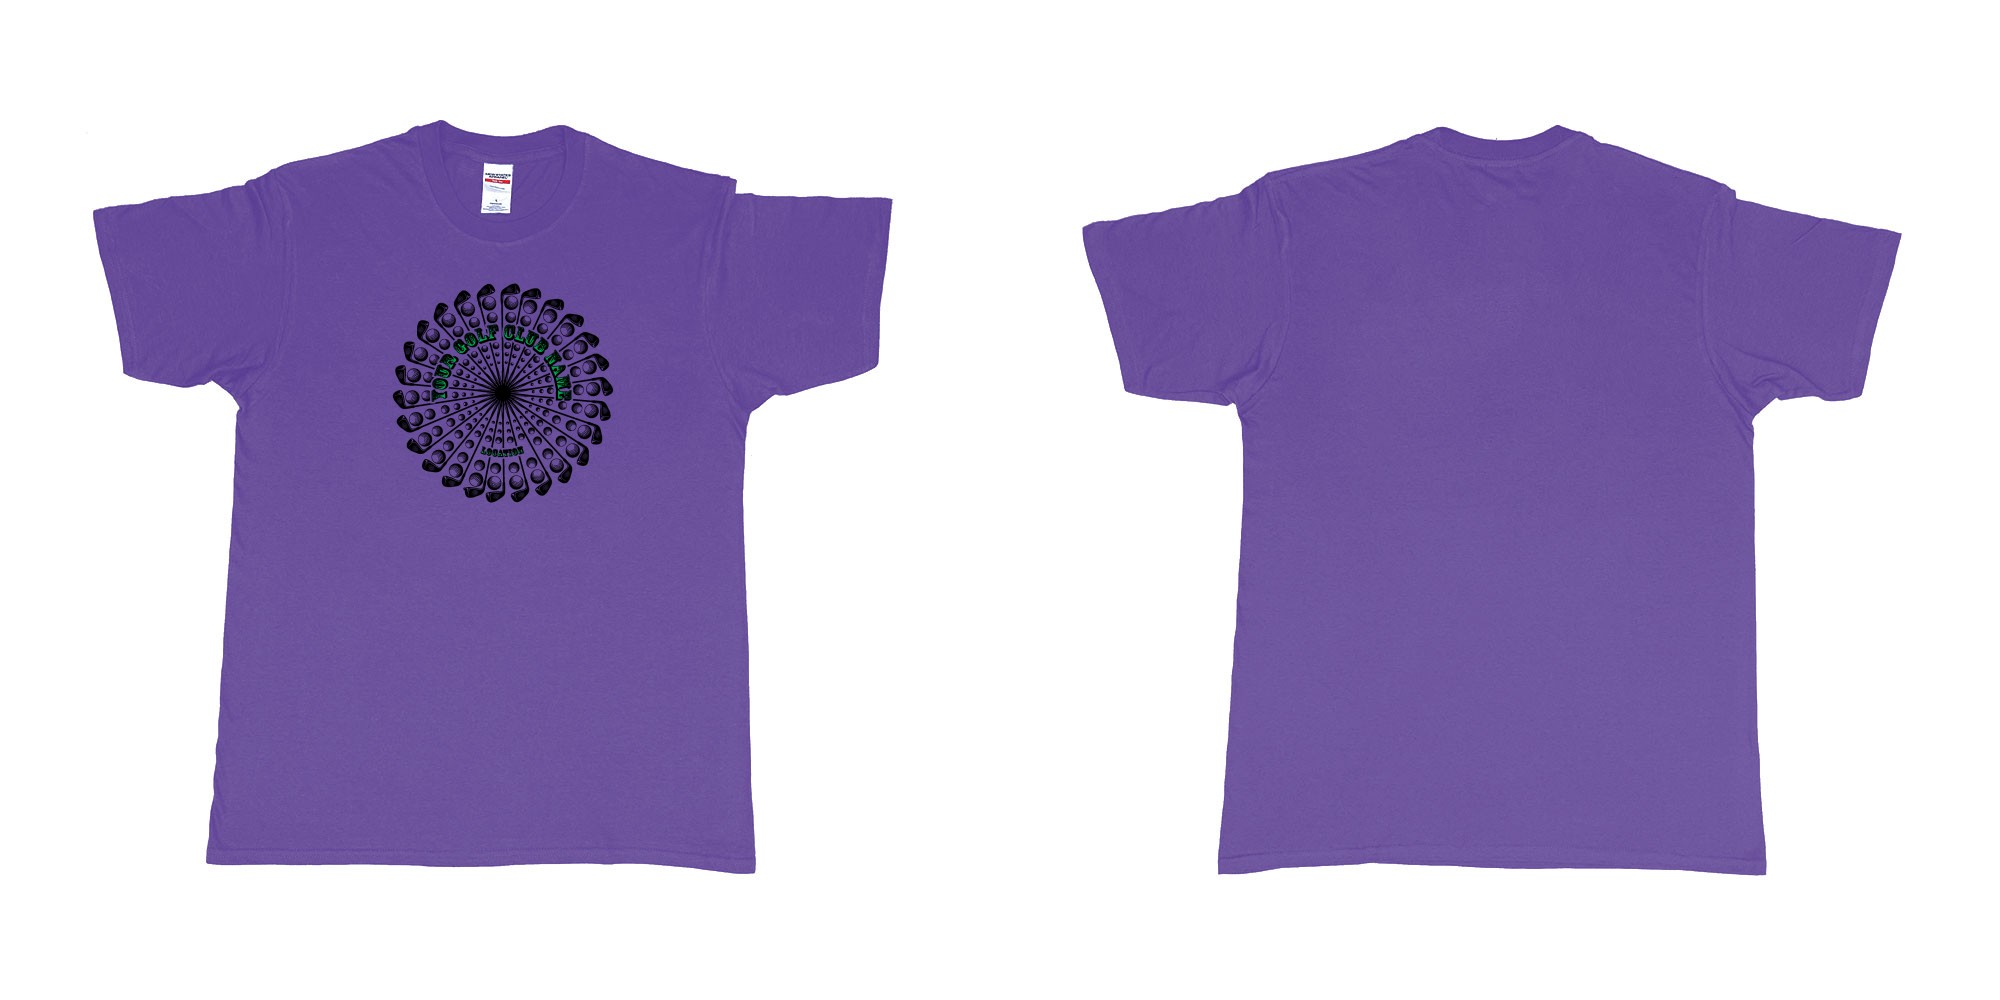 Custom tshirt design golf clubs balls mandala cutoms club name location in fabric color purple choice your own text made in Bali by The Pirate Way